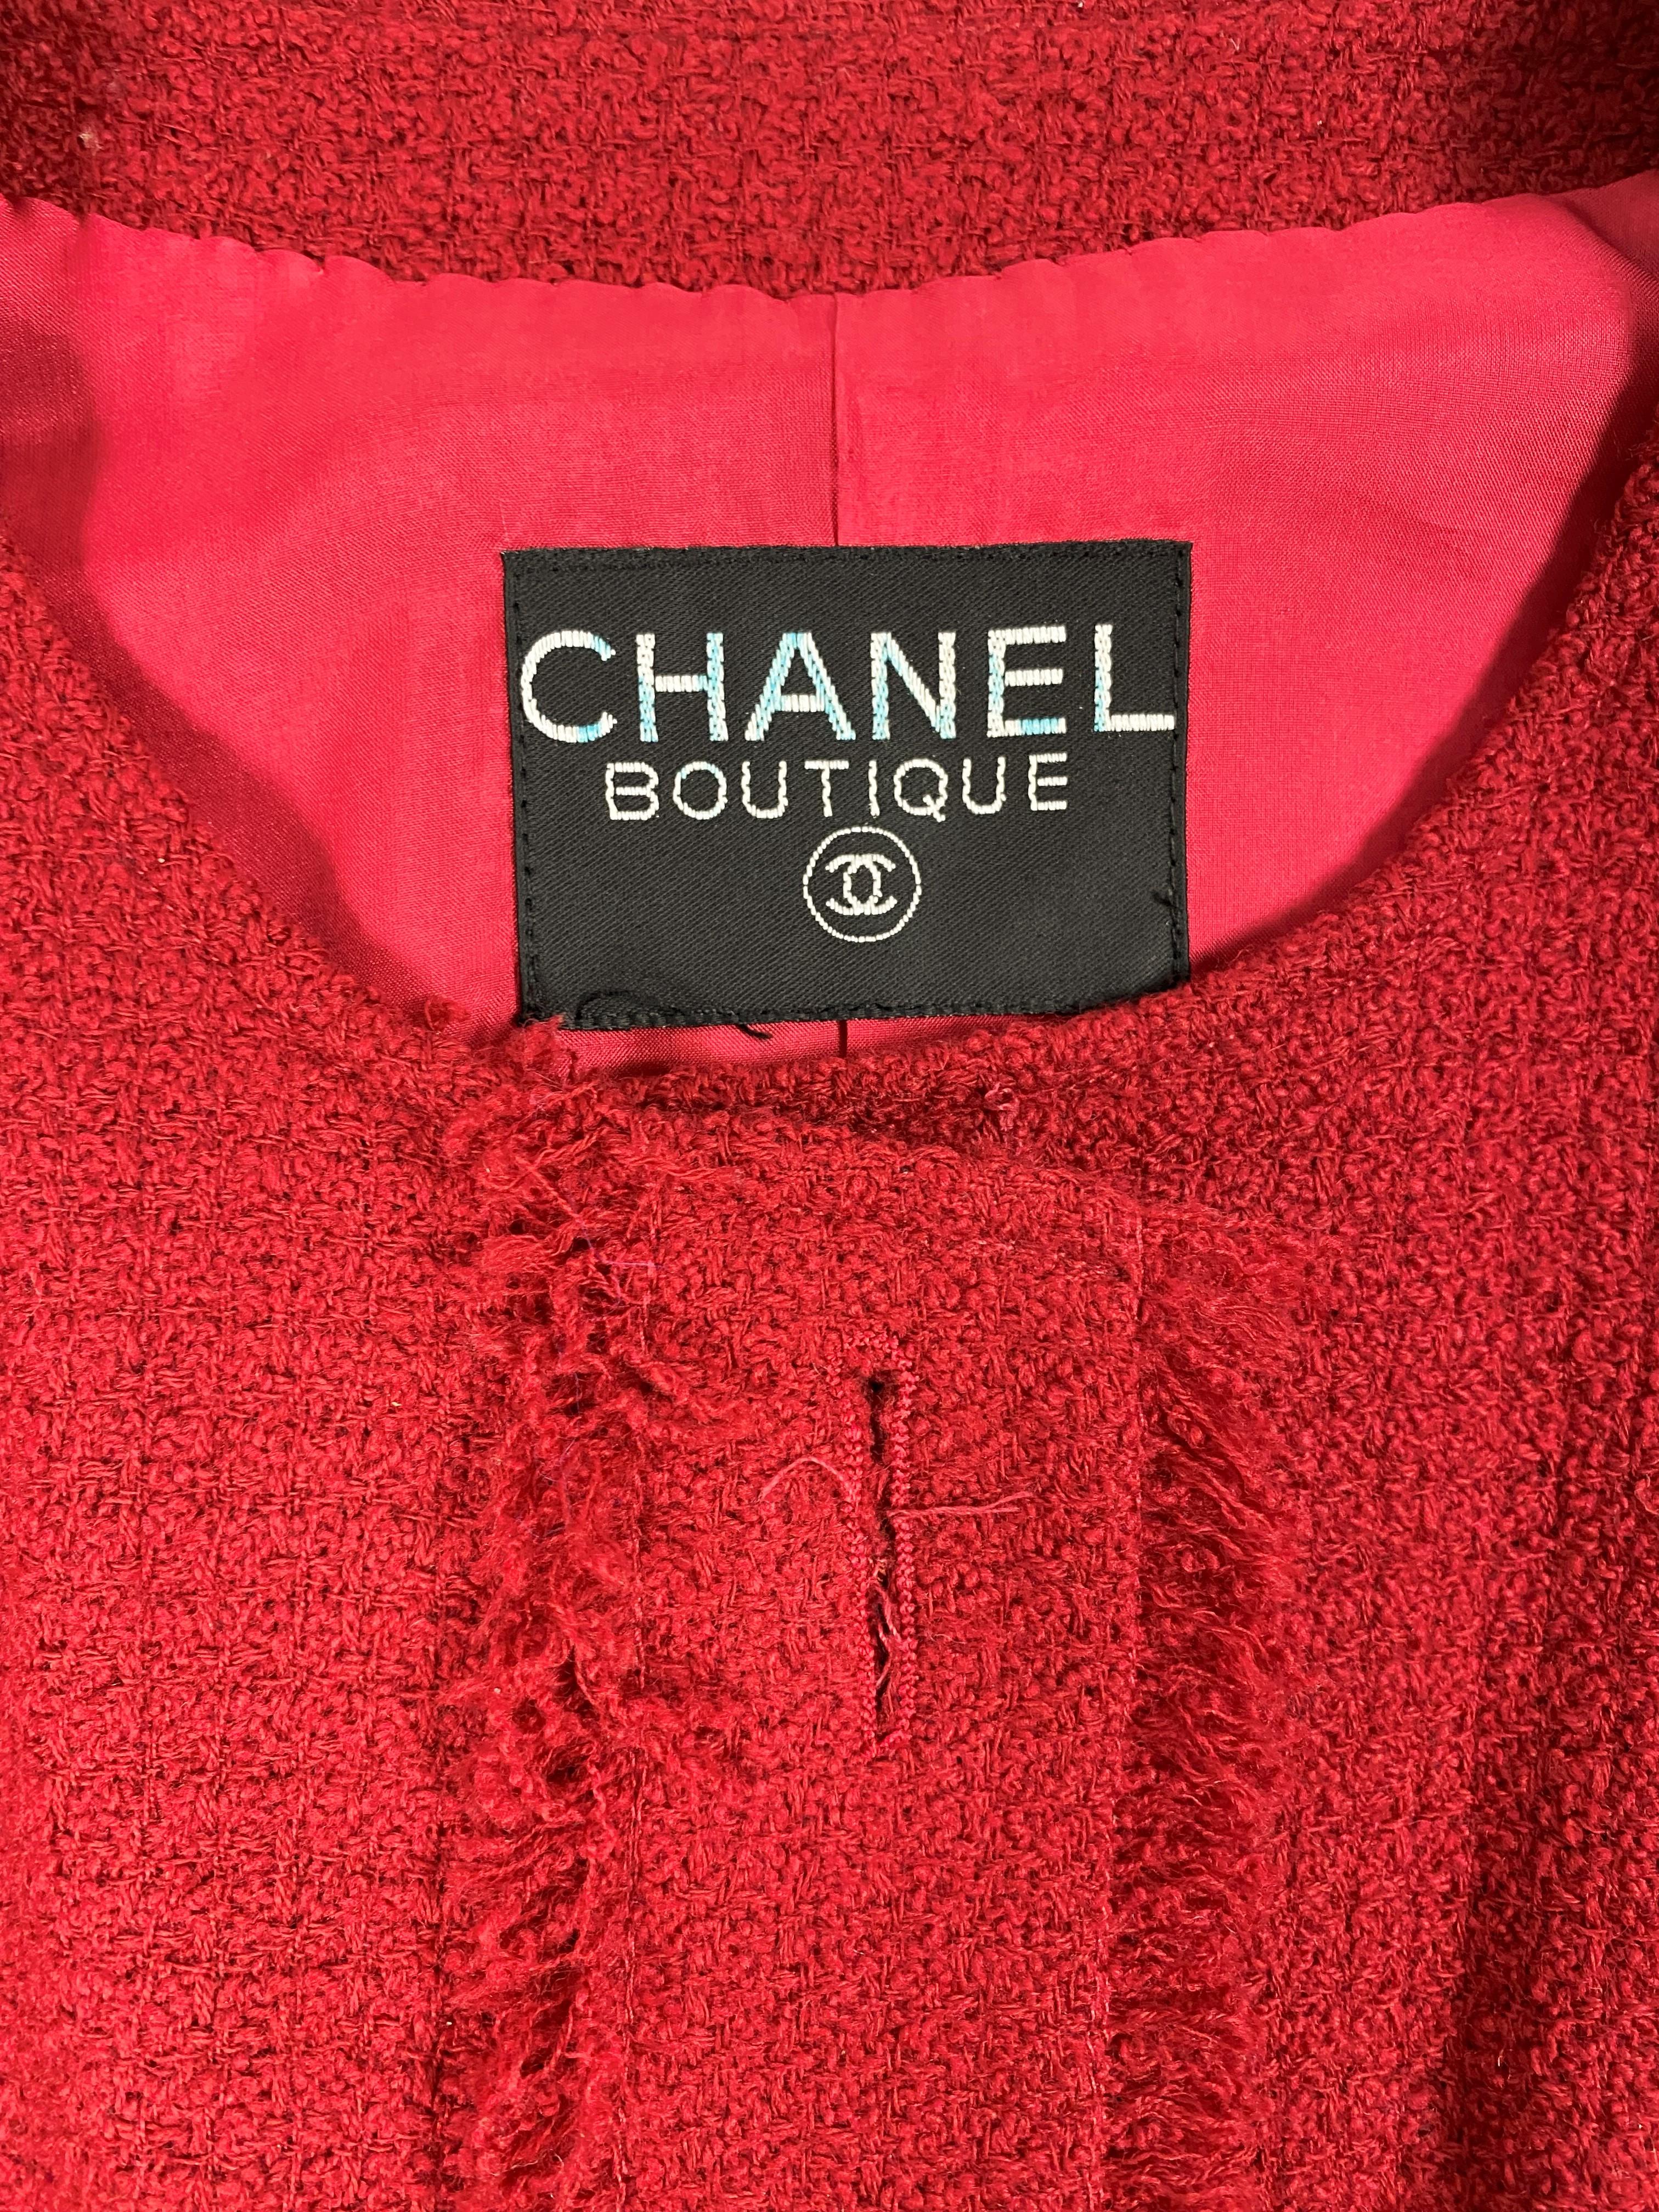 A Chanel - Karl Lagerfeld Red Mohair Wool Jacket Circa 1995-2000 For Sale 7